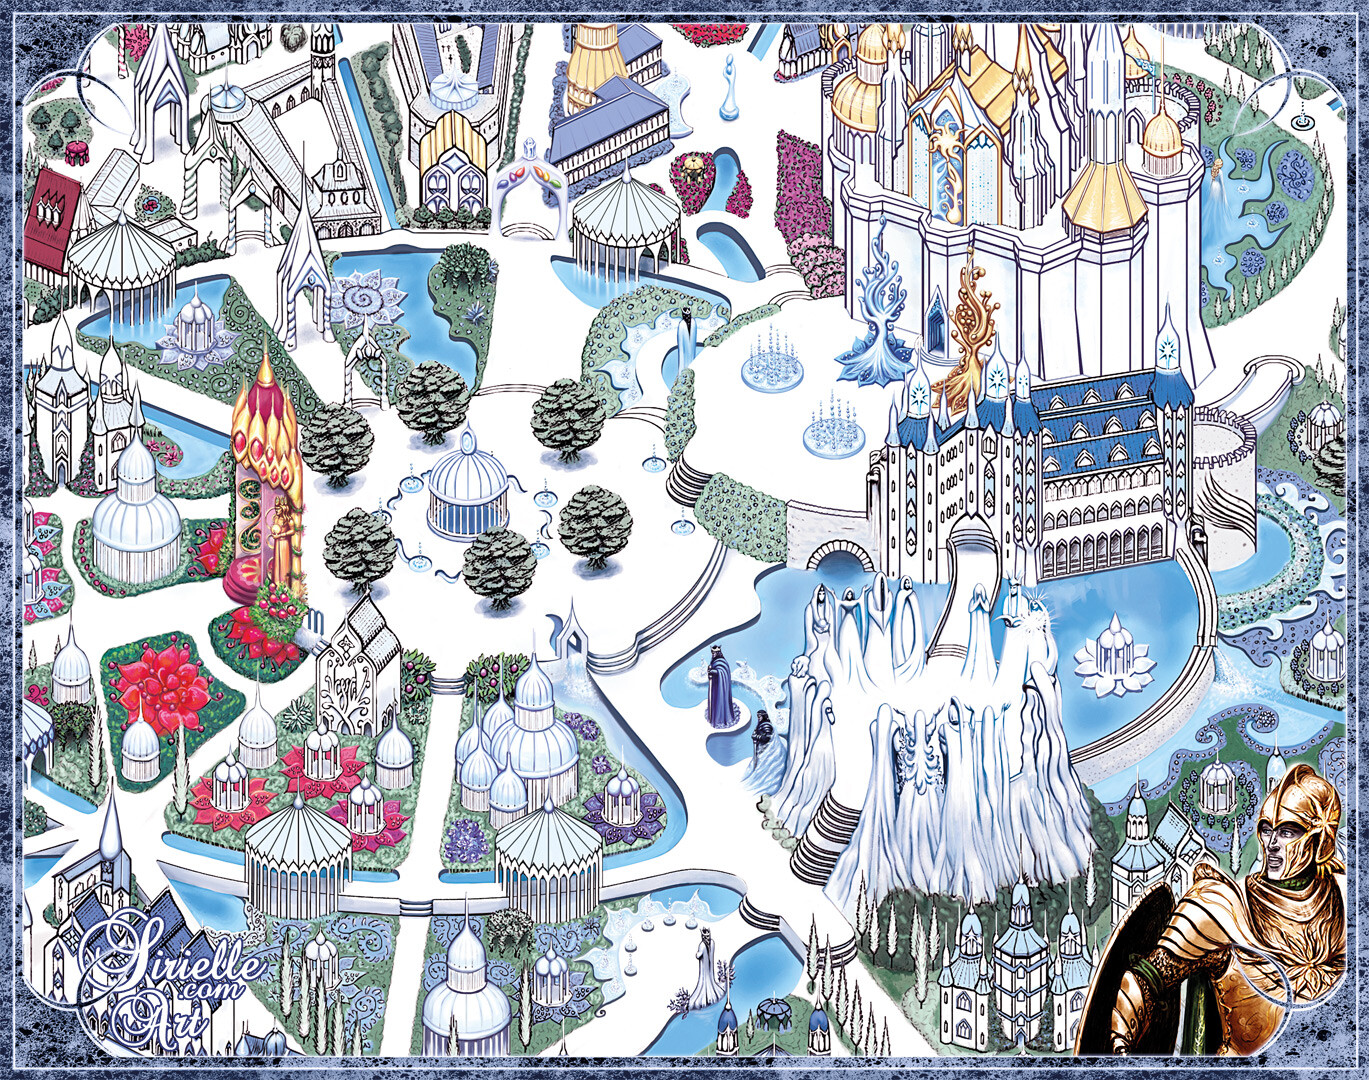 Gondolin from "The Silmarillion" in a fantasy map style, city center closeup.